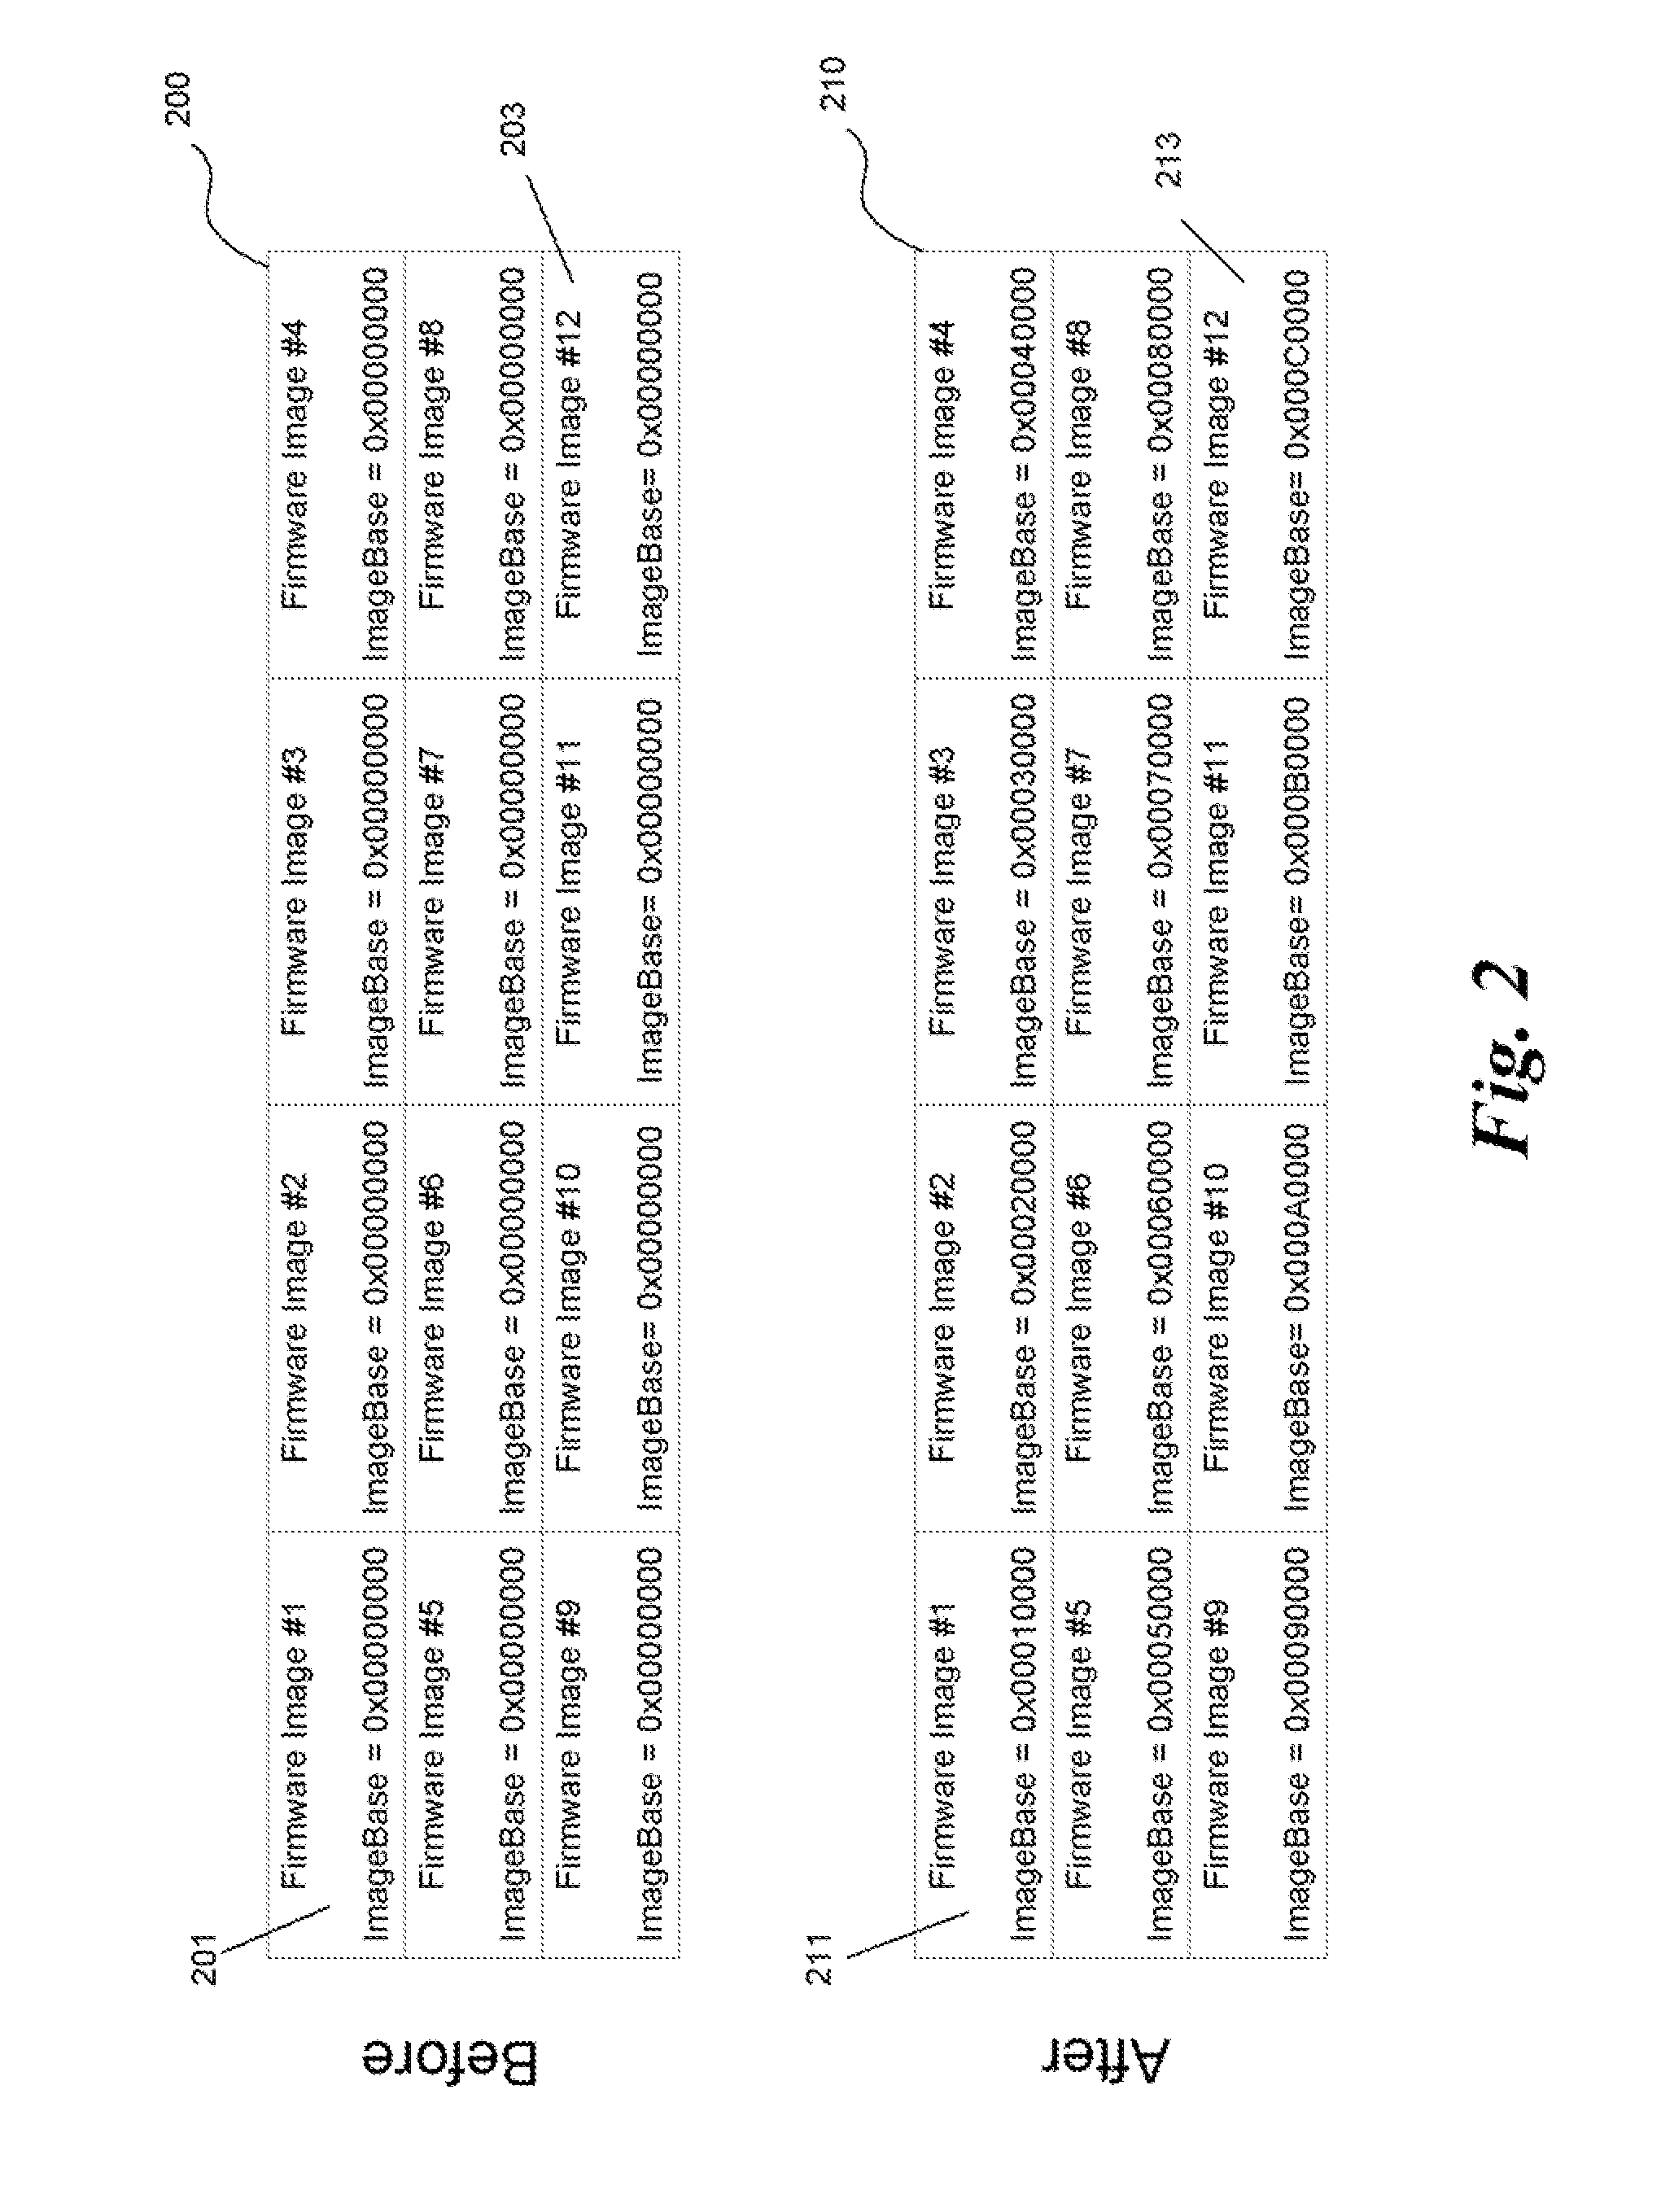 System and method to enable parallelization of early platform initialization